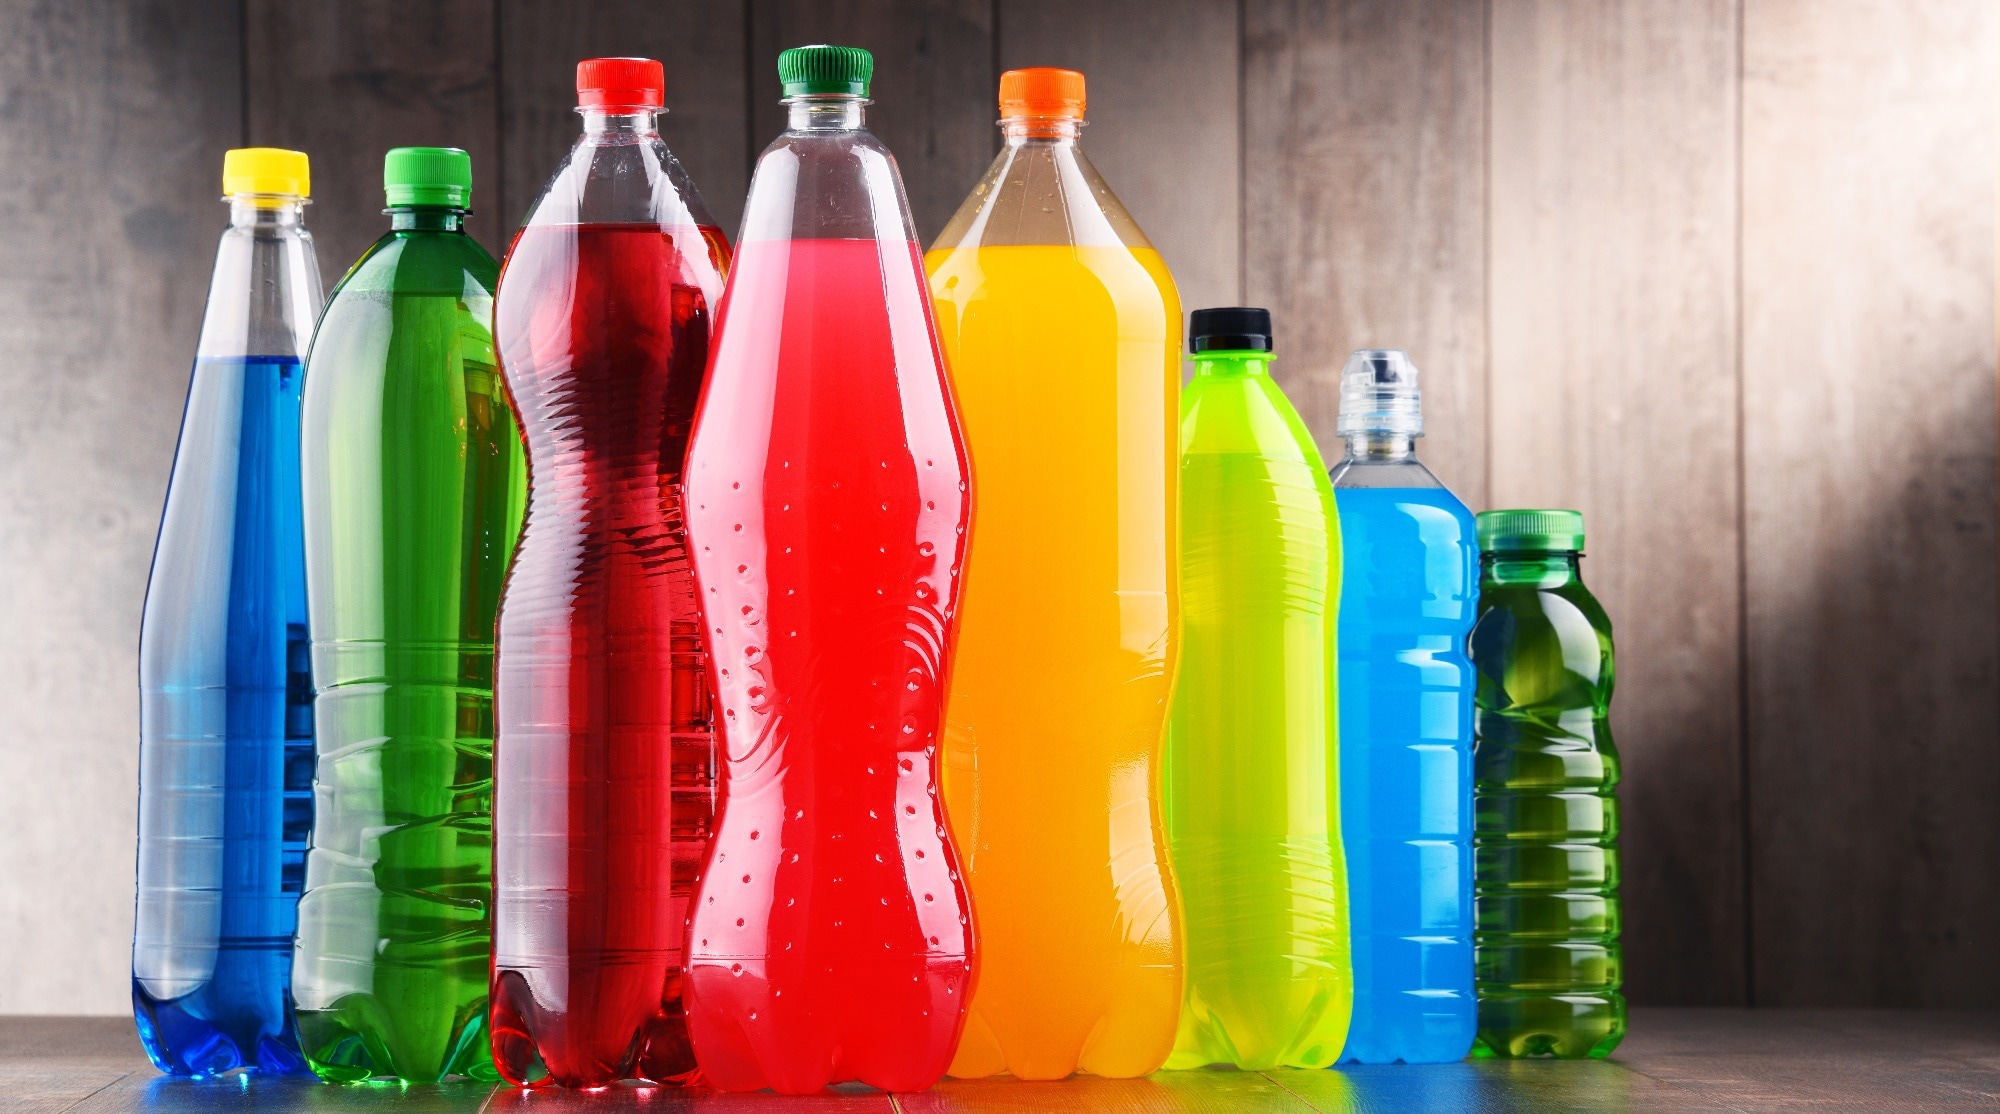 Study: Associations between Knowledge of Health Risks and Sugar-Sweetened Beverage Intake among US Adolescents. Image Credit: monticello/Shutterstock.com